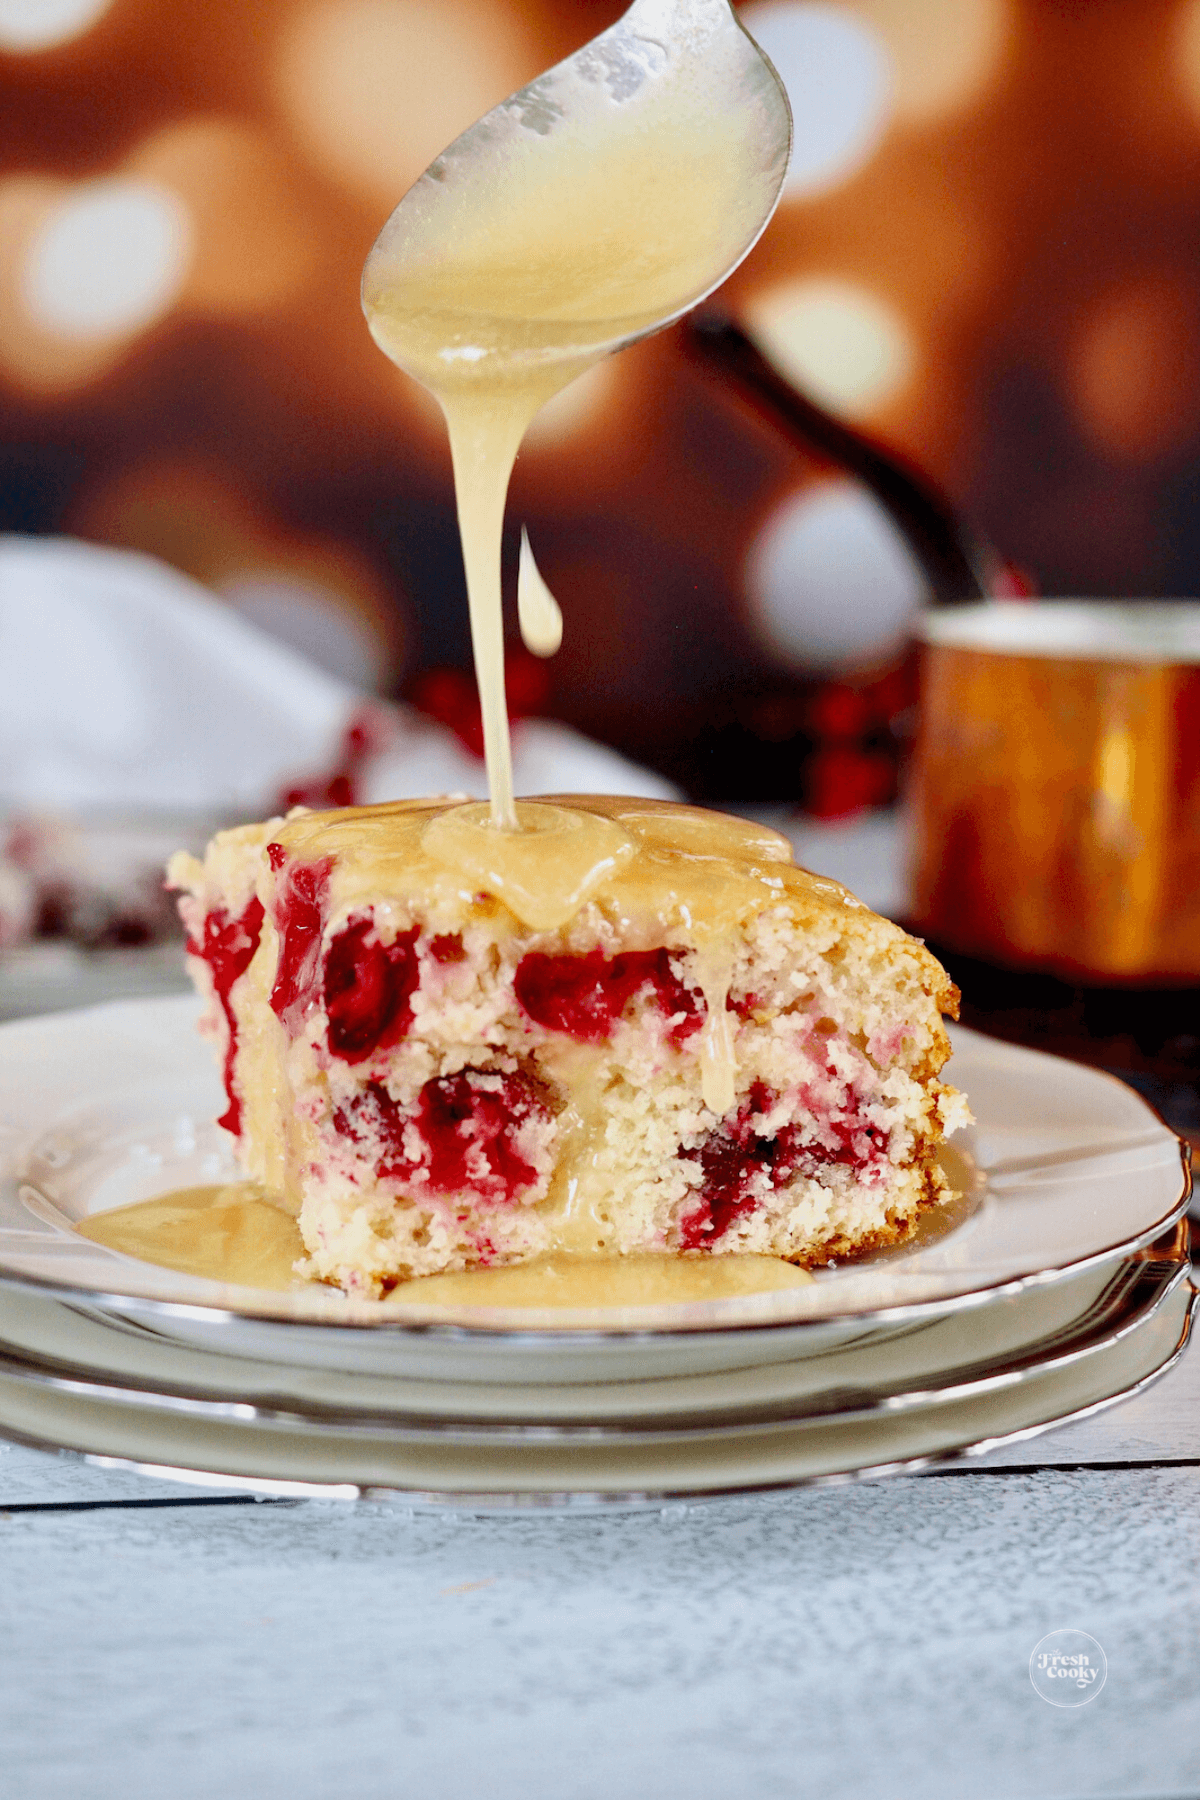 https://www.thefreshcooky.com/wp-content/uploads/2021/11/cranberry-cake-recipe-with-butter-sauce-3.png